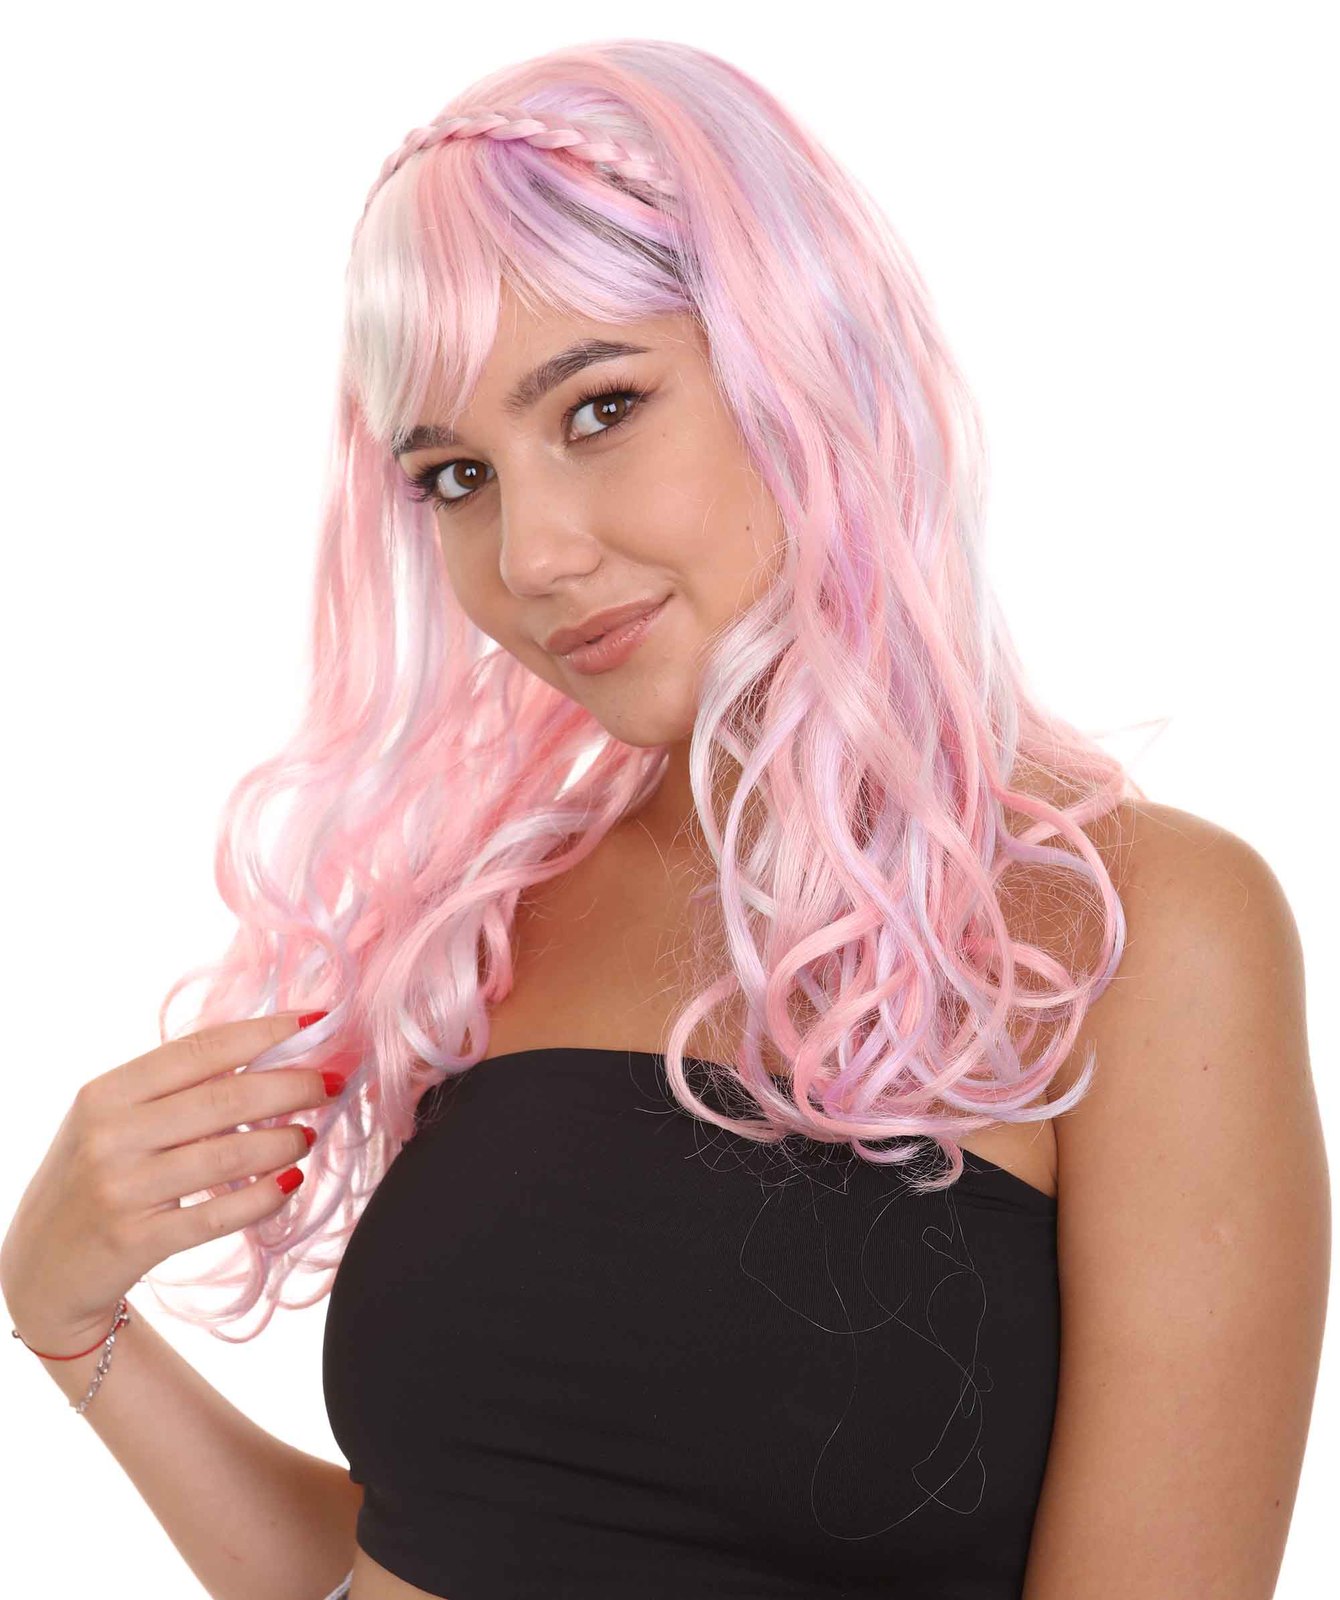 Women's Wig | Pink and Purple Ombre Wig | Premium Breathable Capless Cap